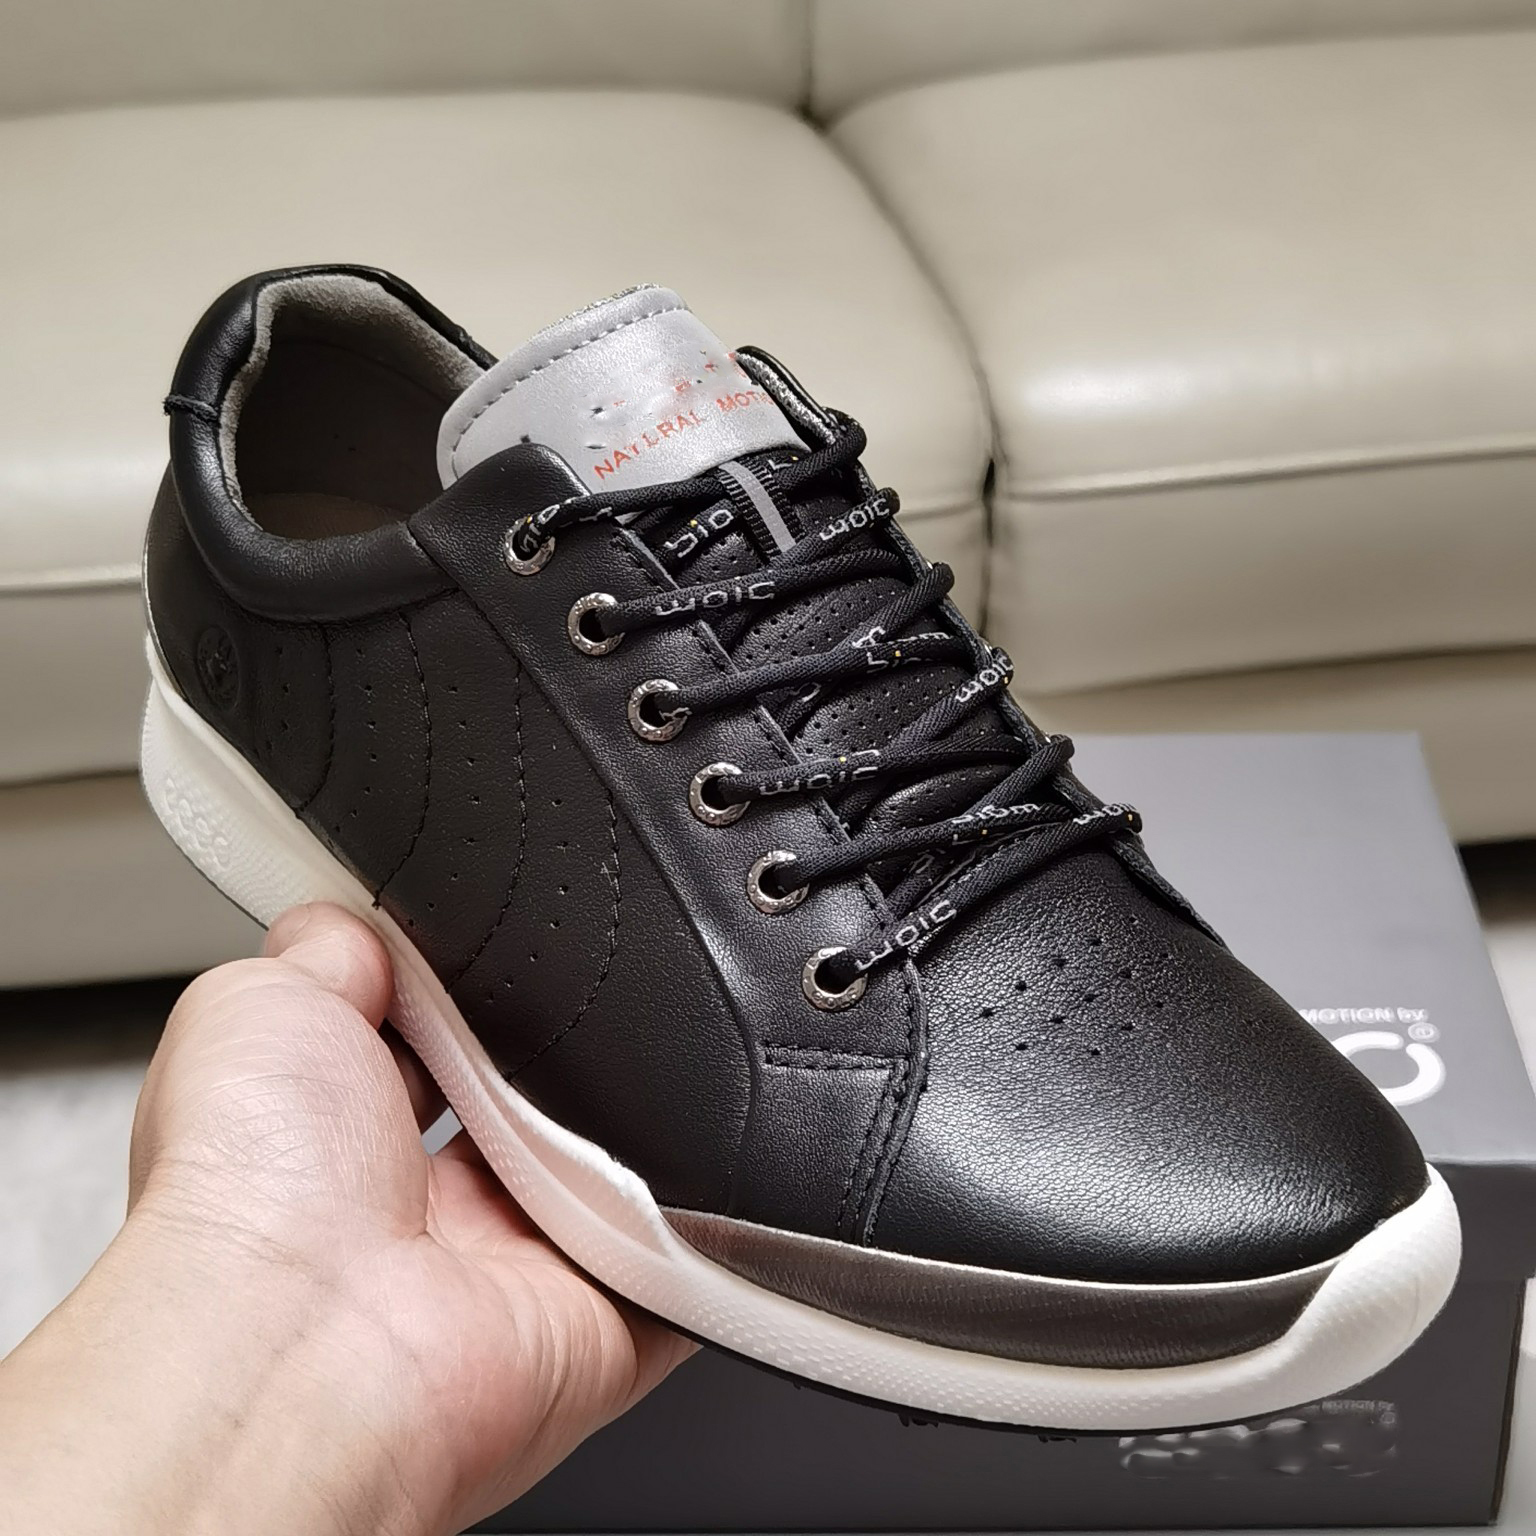 Genuine Leather Golf Shoes for Men Brand Golf Shoes Professional Sport Shoes Men's Walking Sport Sneakers for Golf Training Boys